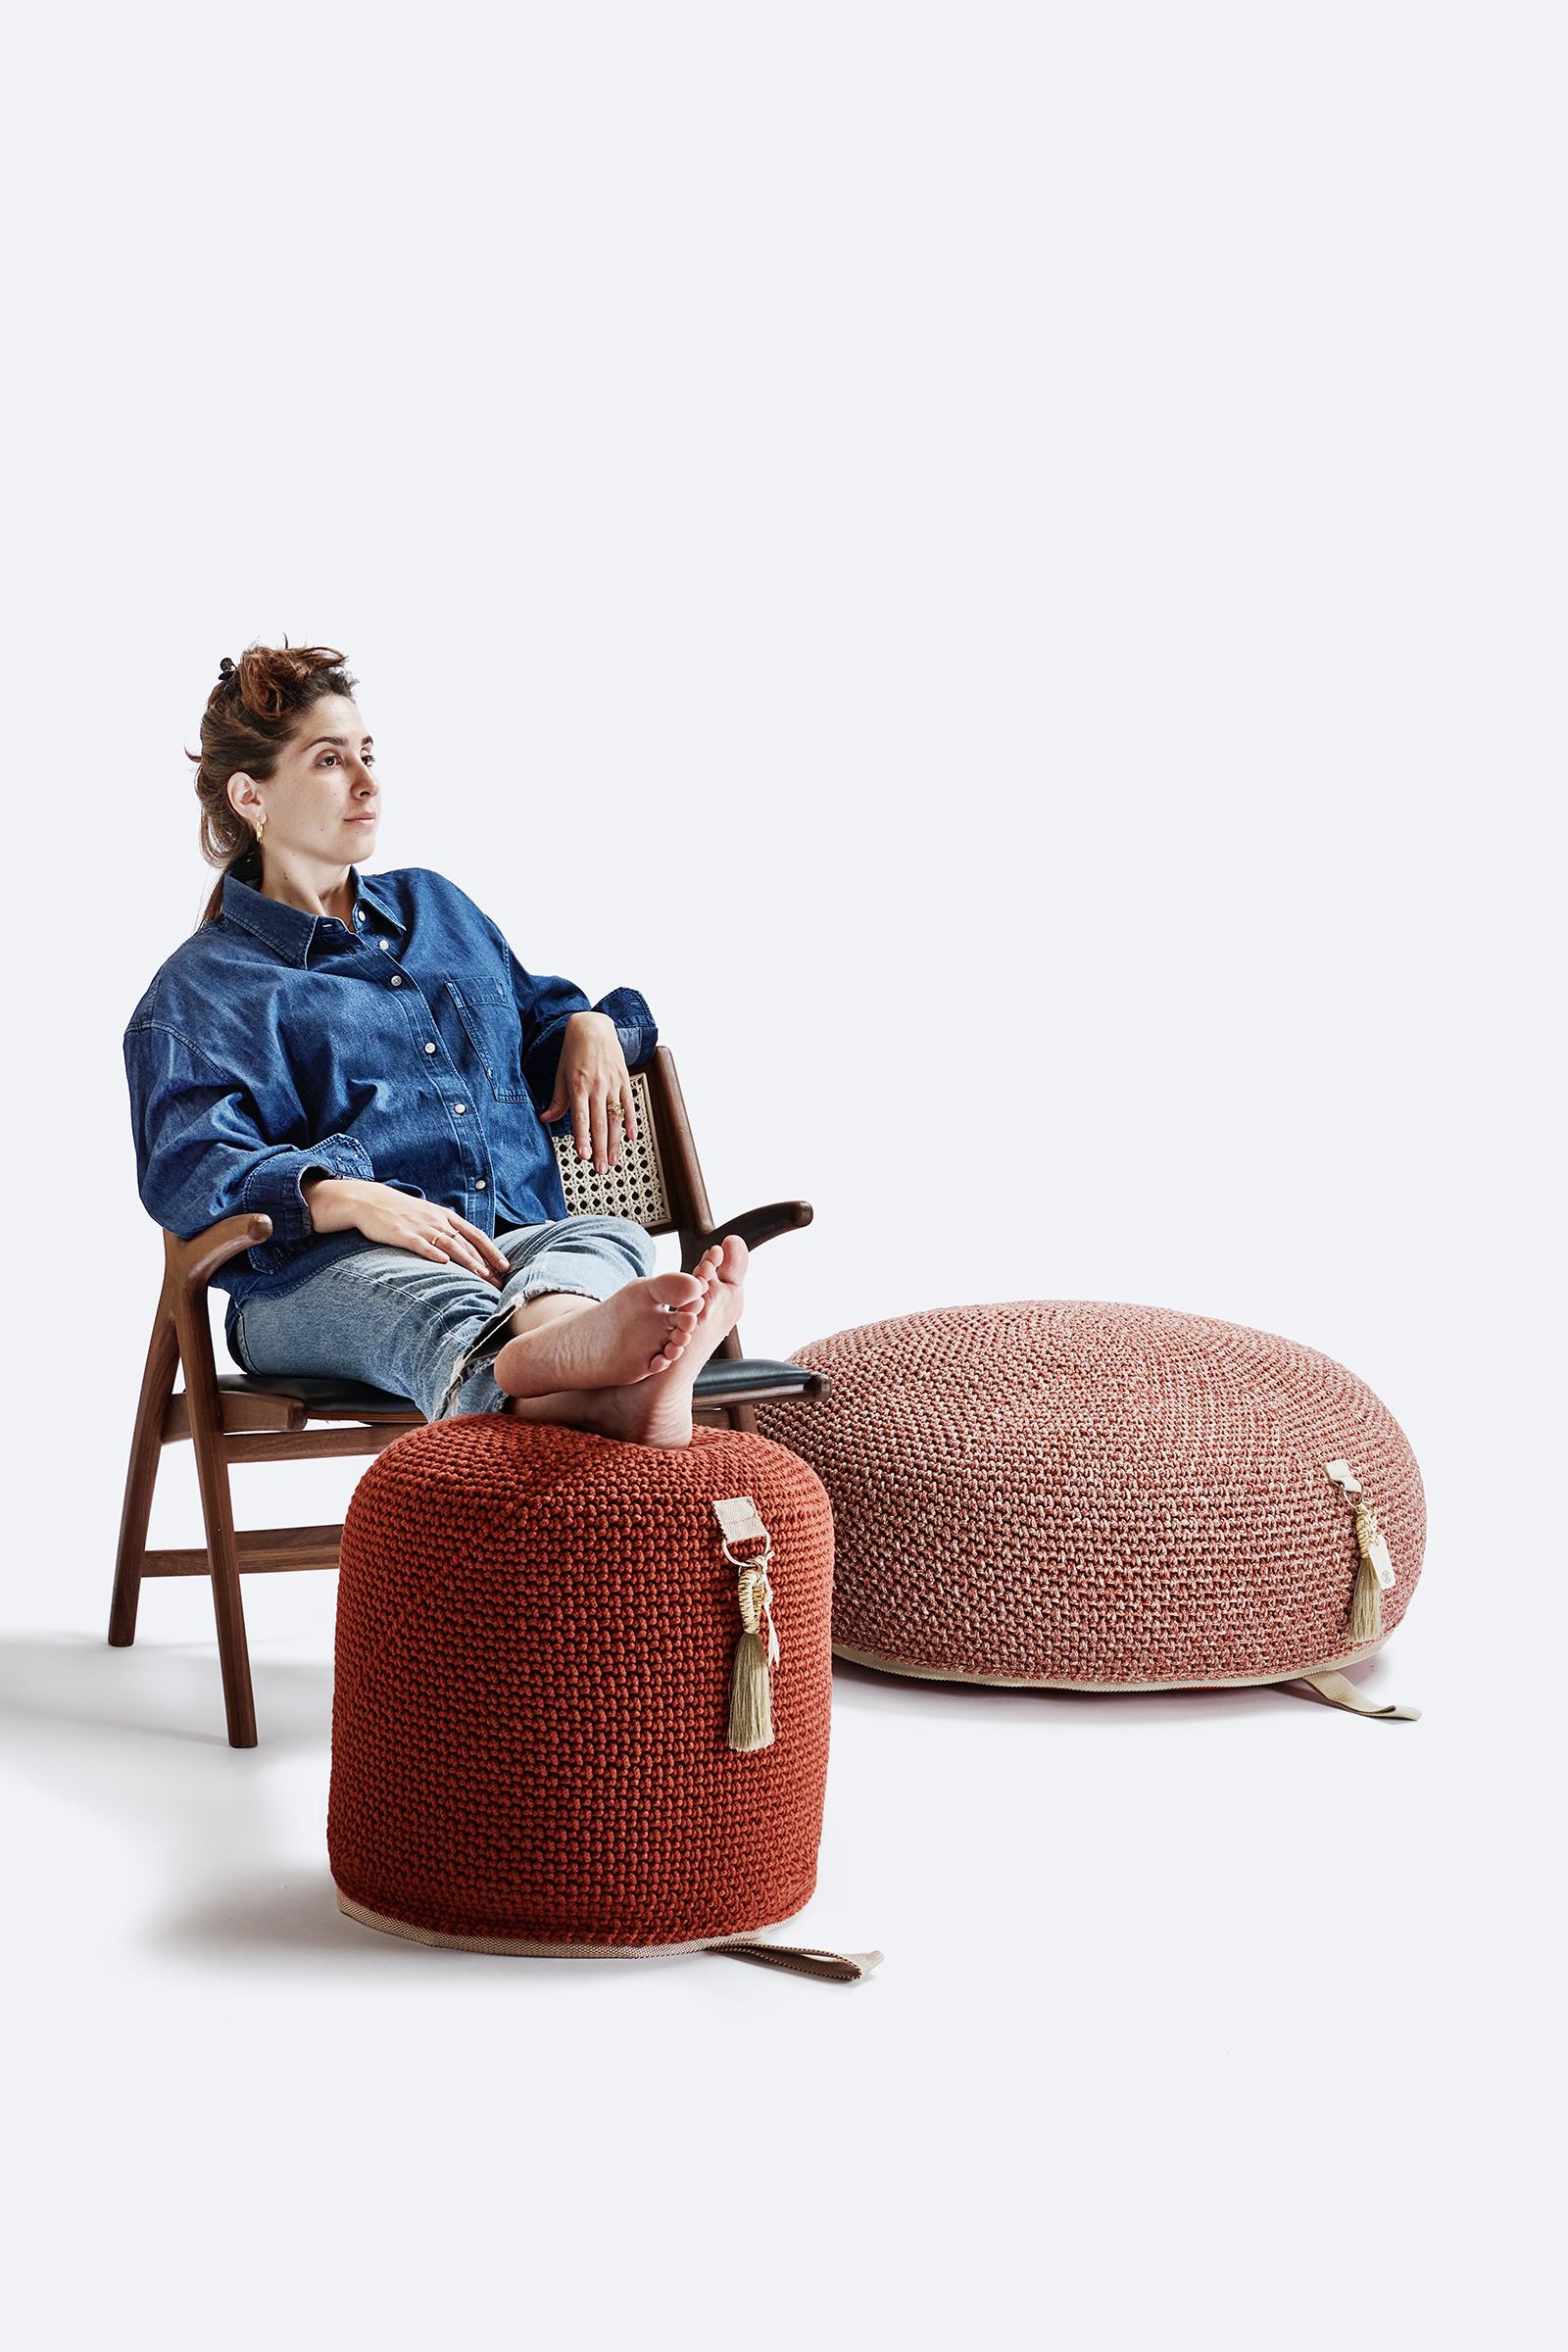 This round, low pouf is the nonchalant seat you’ve been looking for. 100% handmade from UV protected acrylic, this pouf is suitable for both indoor and outdoor, complete with a handle to carry it wherever you need.

In addition to being a